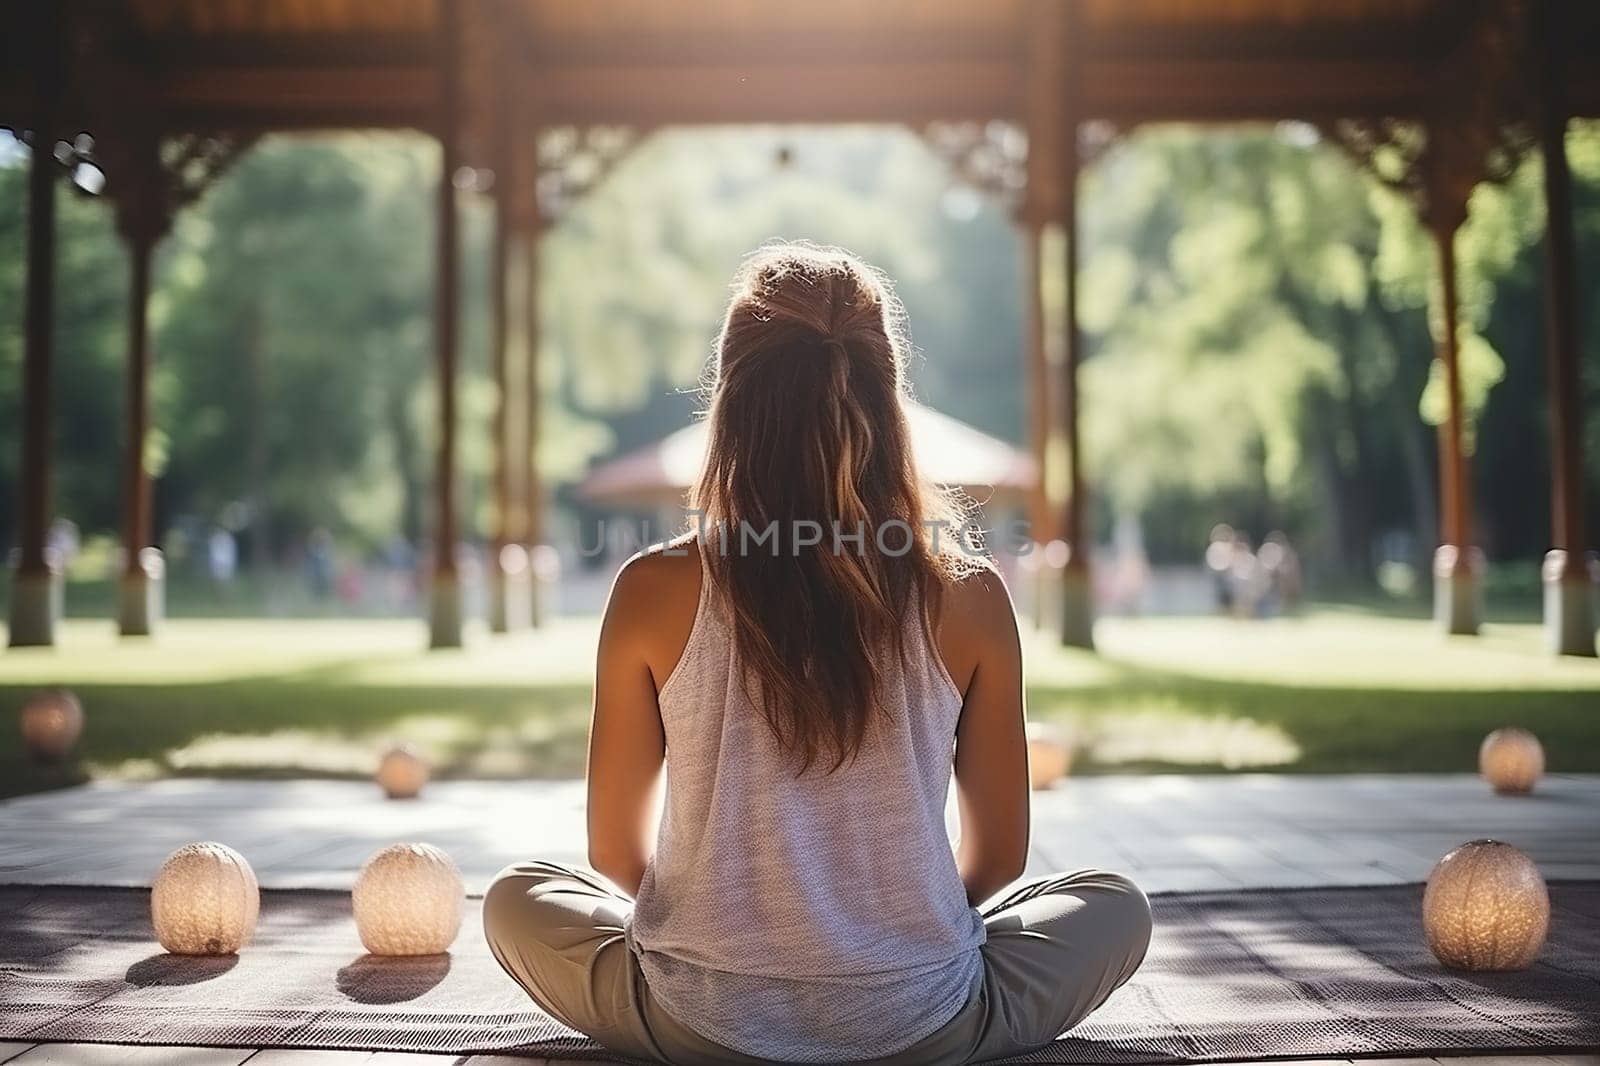 Rear view of a woman sitting in the lotus position in the park. Generated by artificial intelligence by Vovmar